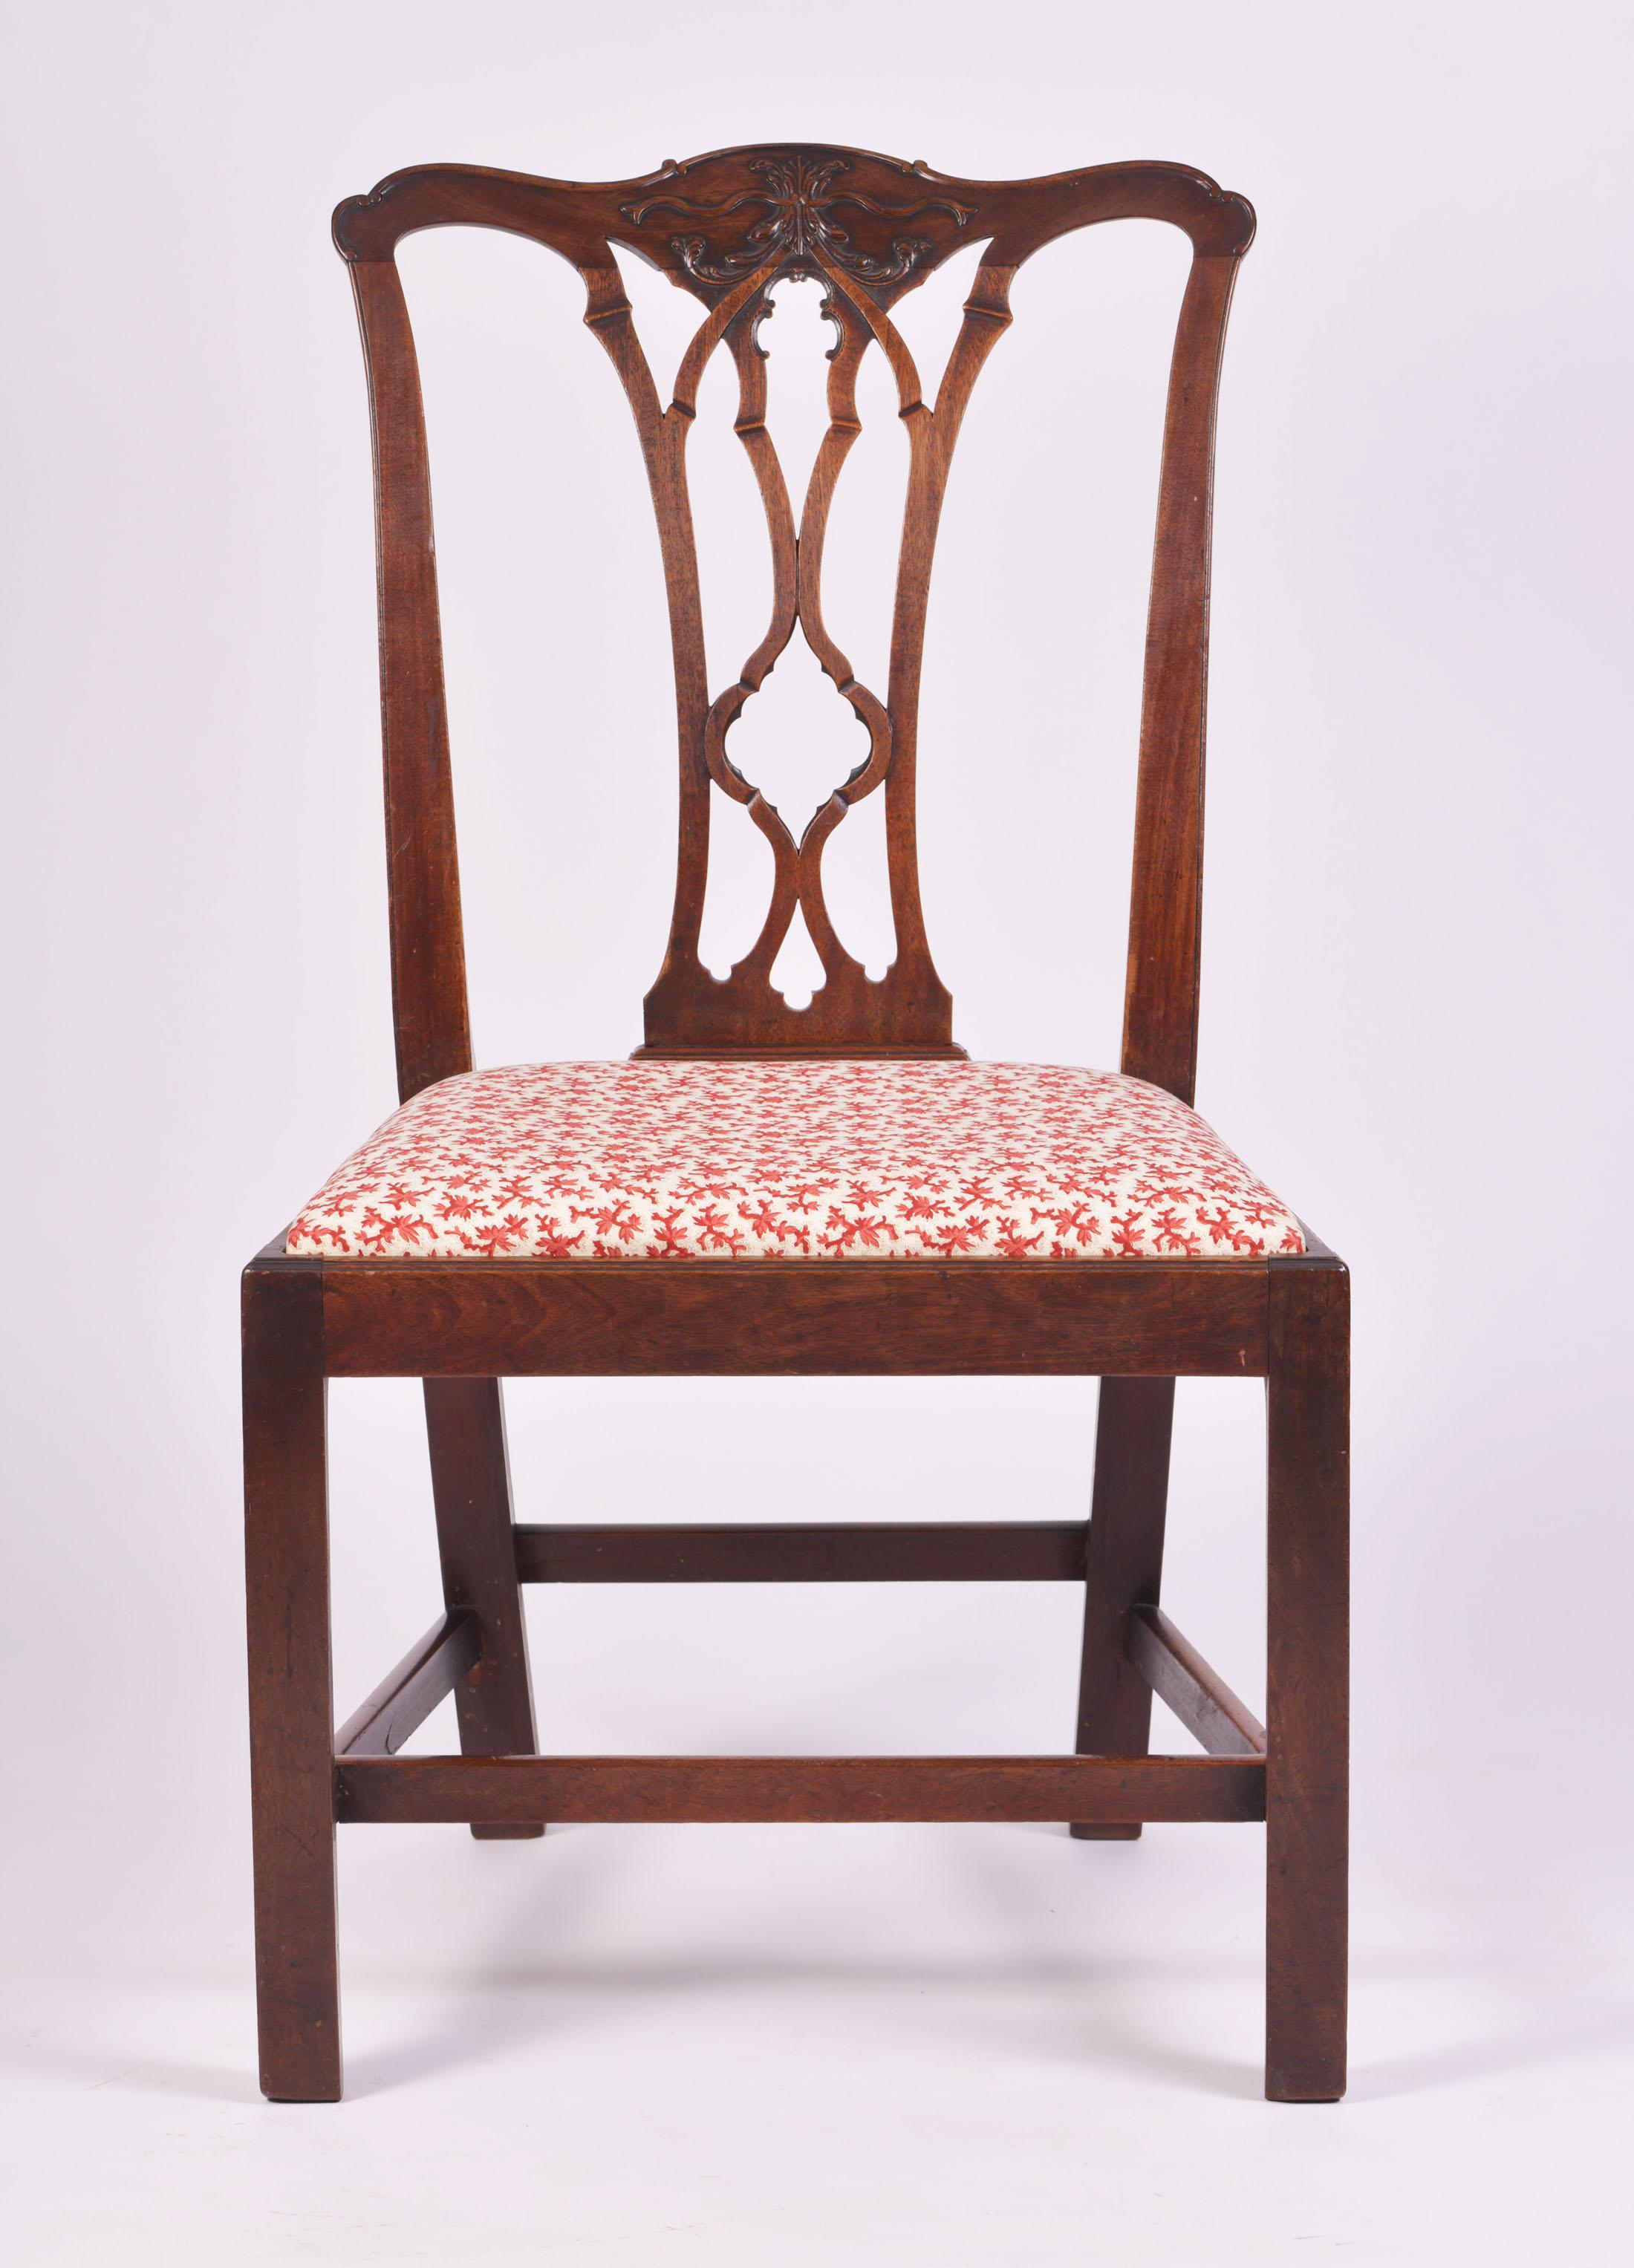 This lovely Chippendale period carved mahogany side chair features an upholstered red patterned seat and a nicely fretted back splat. The chair measures 20 ½ in – 52 cm deep, 22 in – 56 cm wide and 38 in – 96.5 cm in height. This attractive and